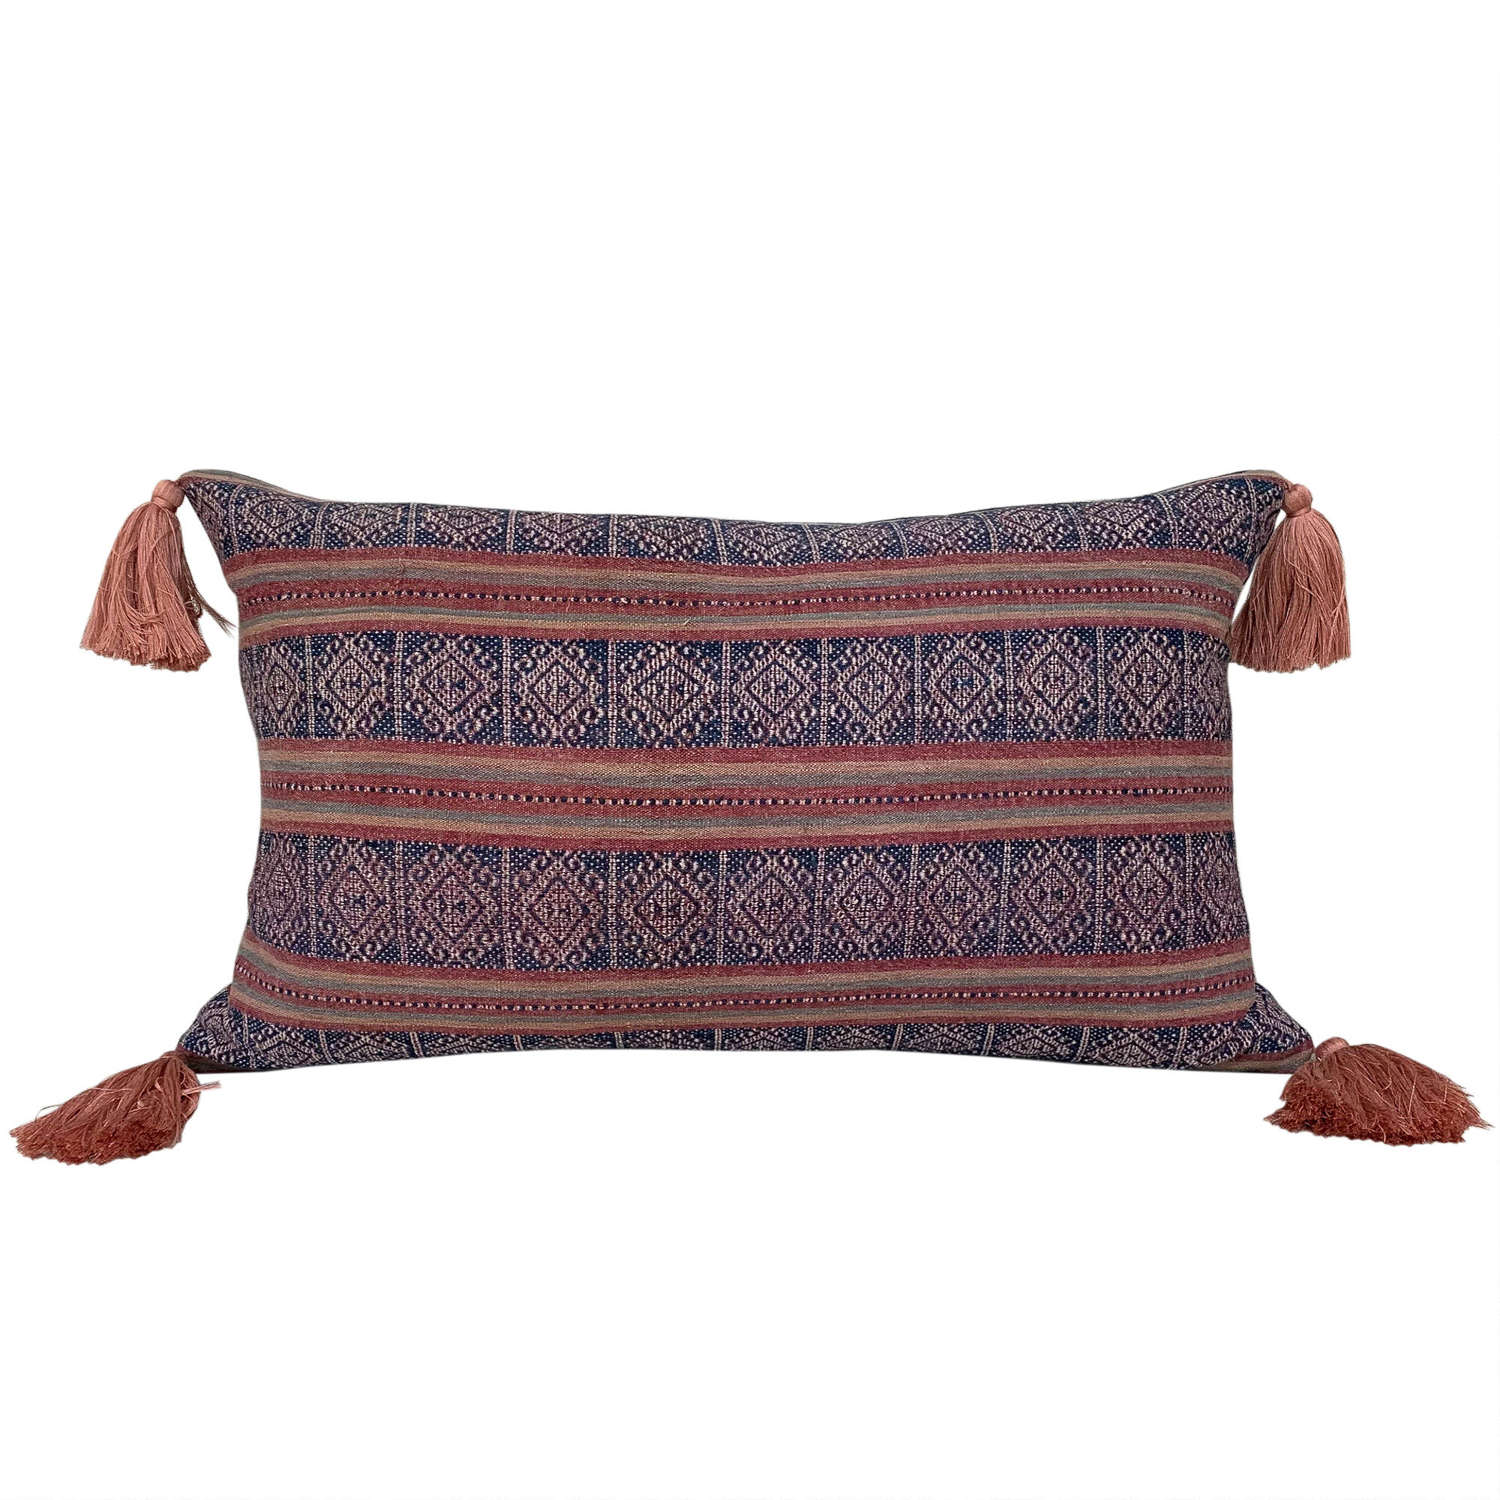 Timor cushion with tassels